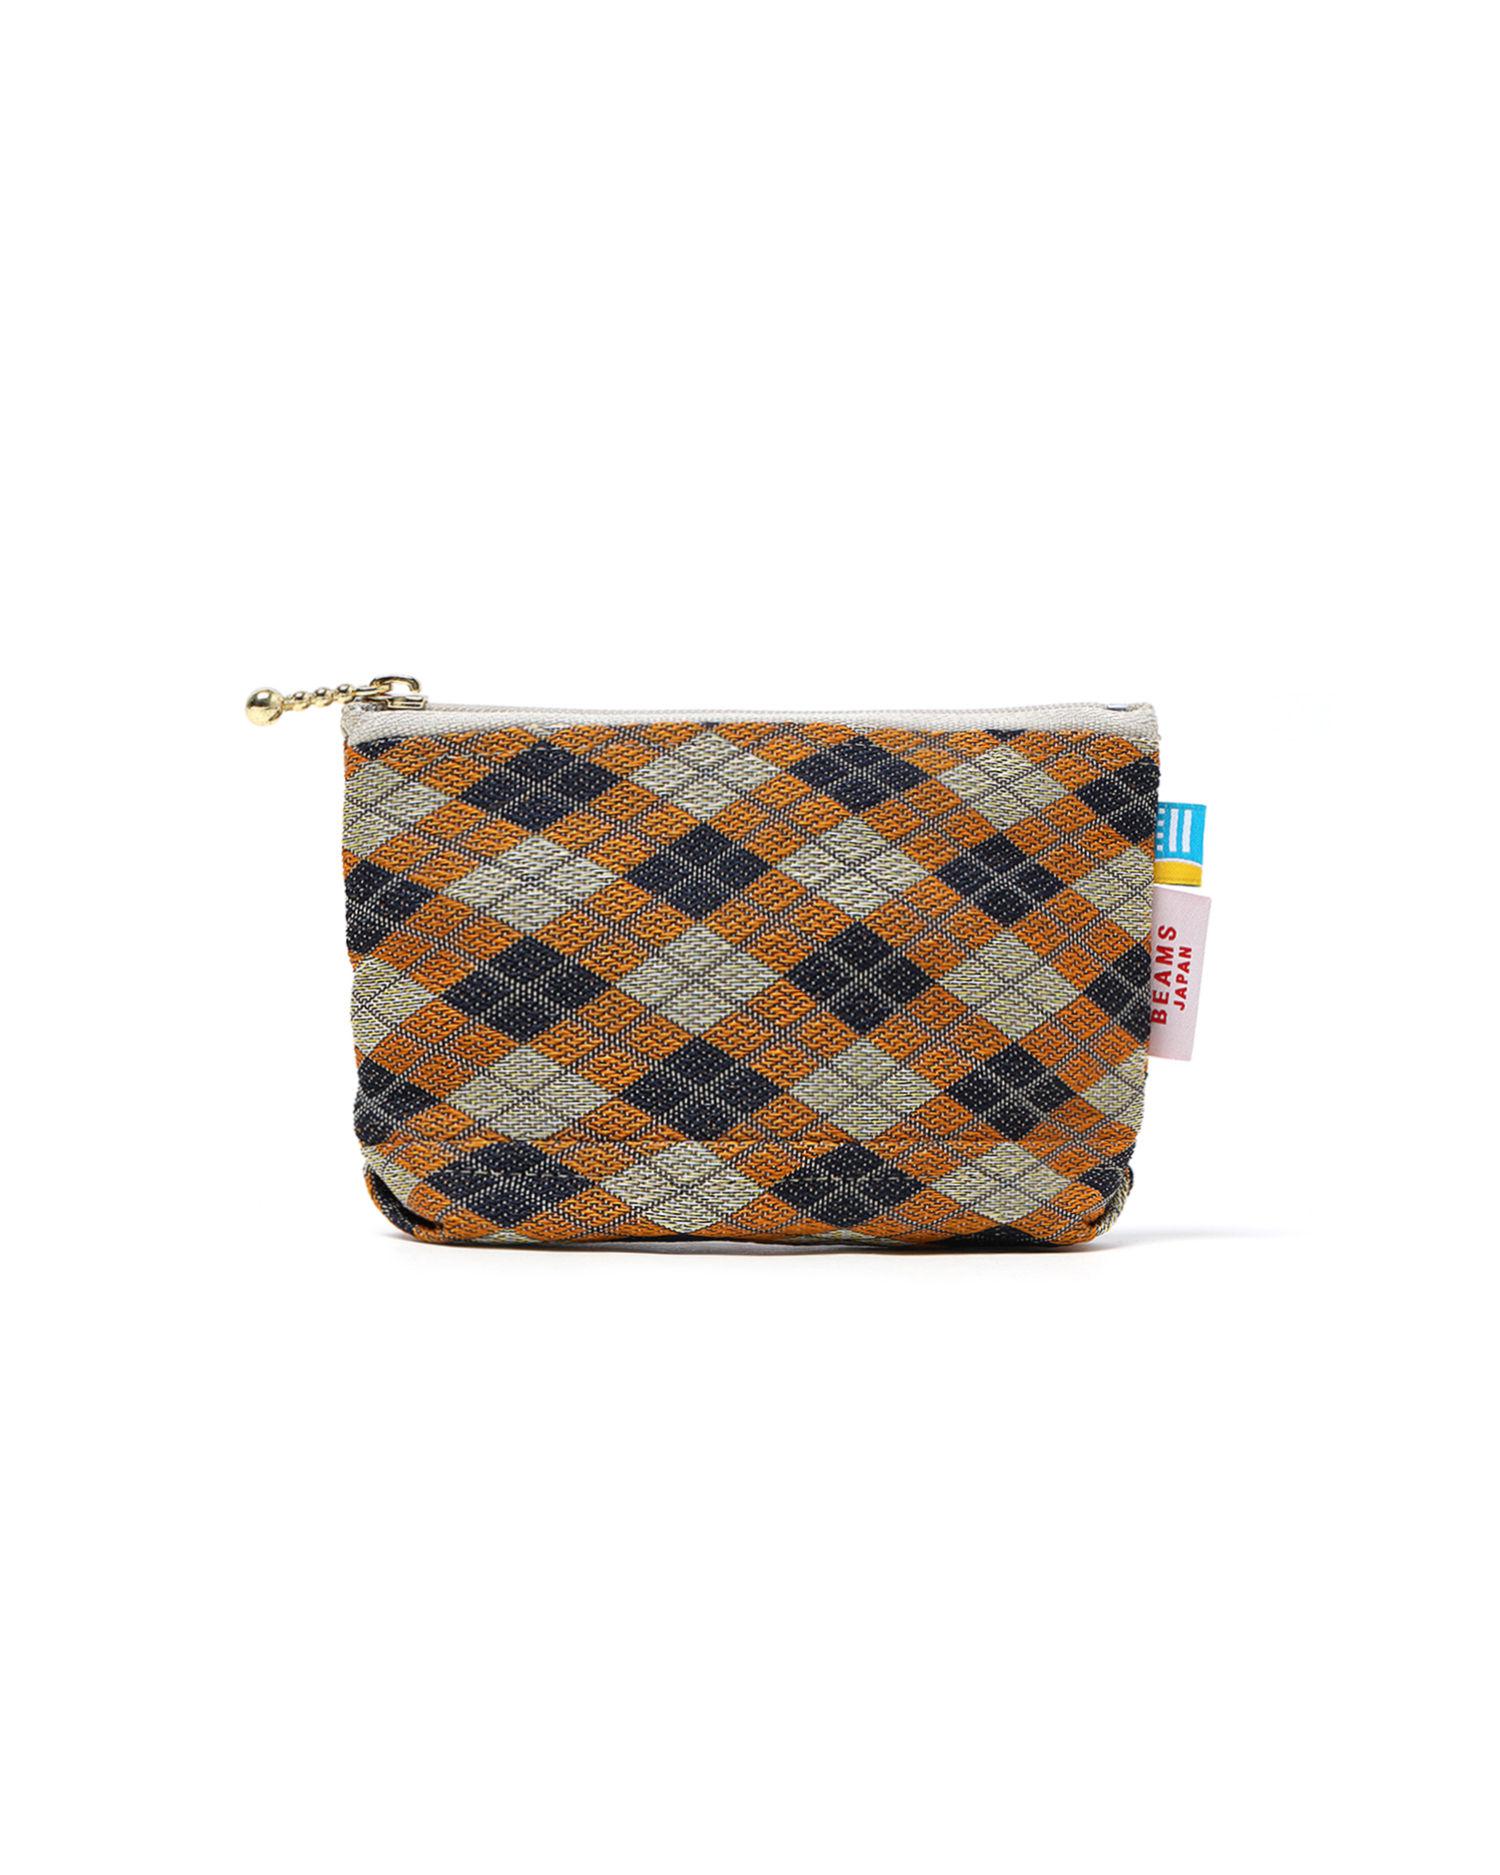 Patterned zip pouch by BEAMS JAPAN